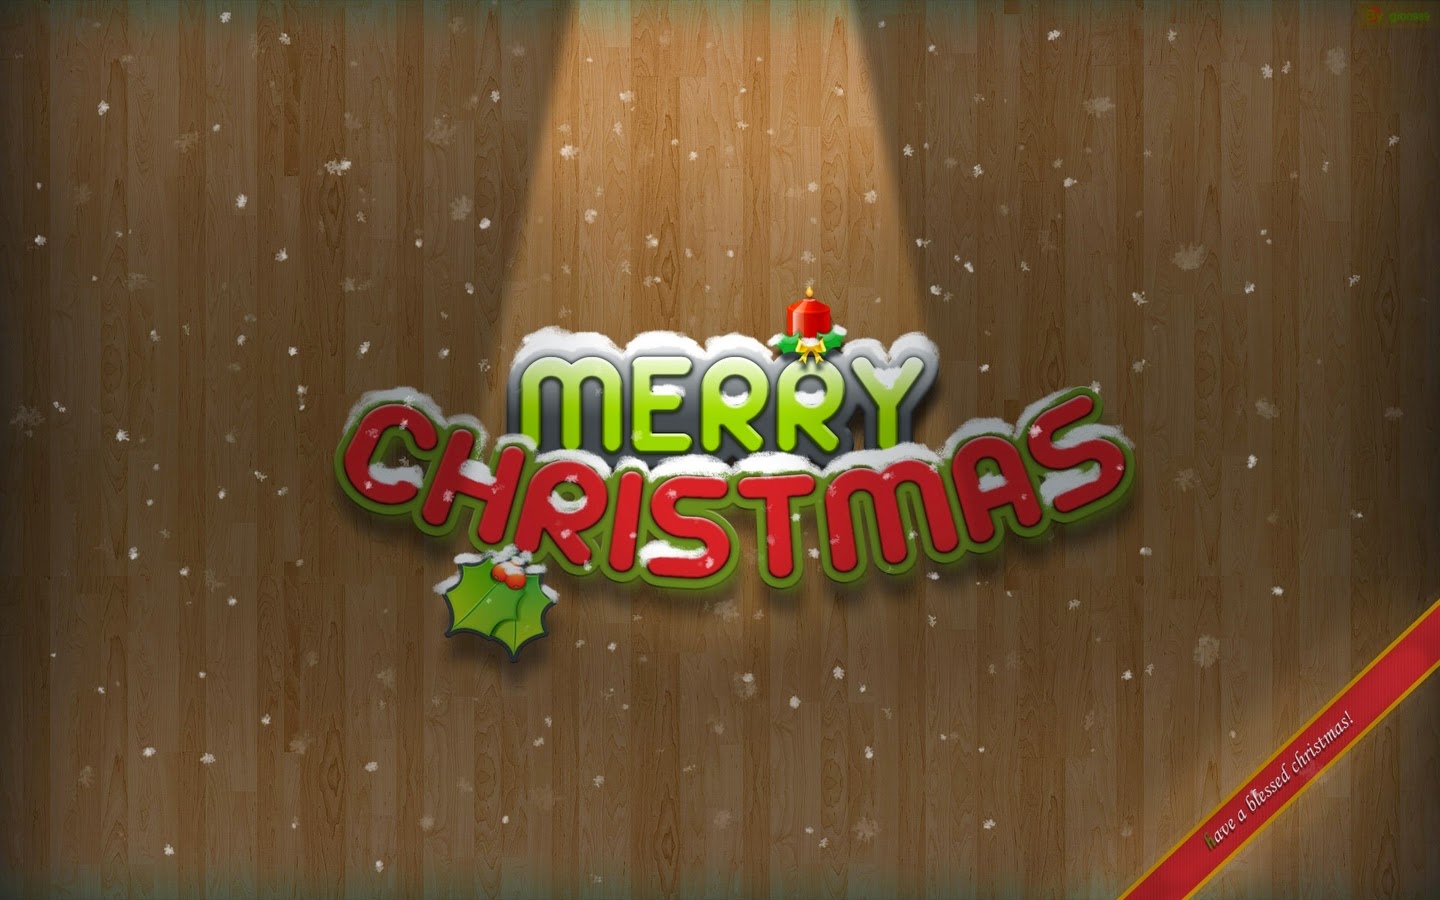 Cute Merry Christmas background Full HD 1080p Wallpapers